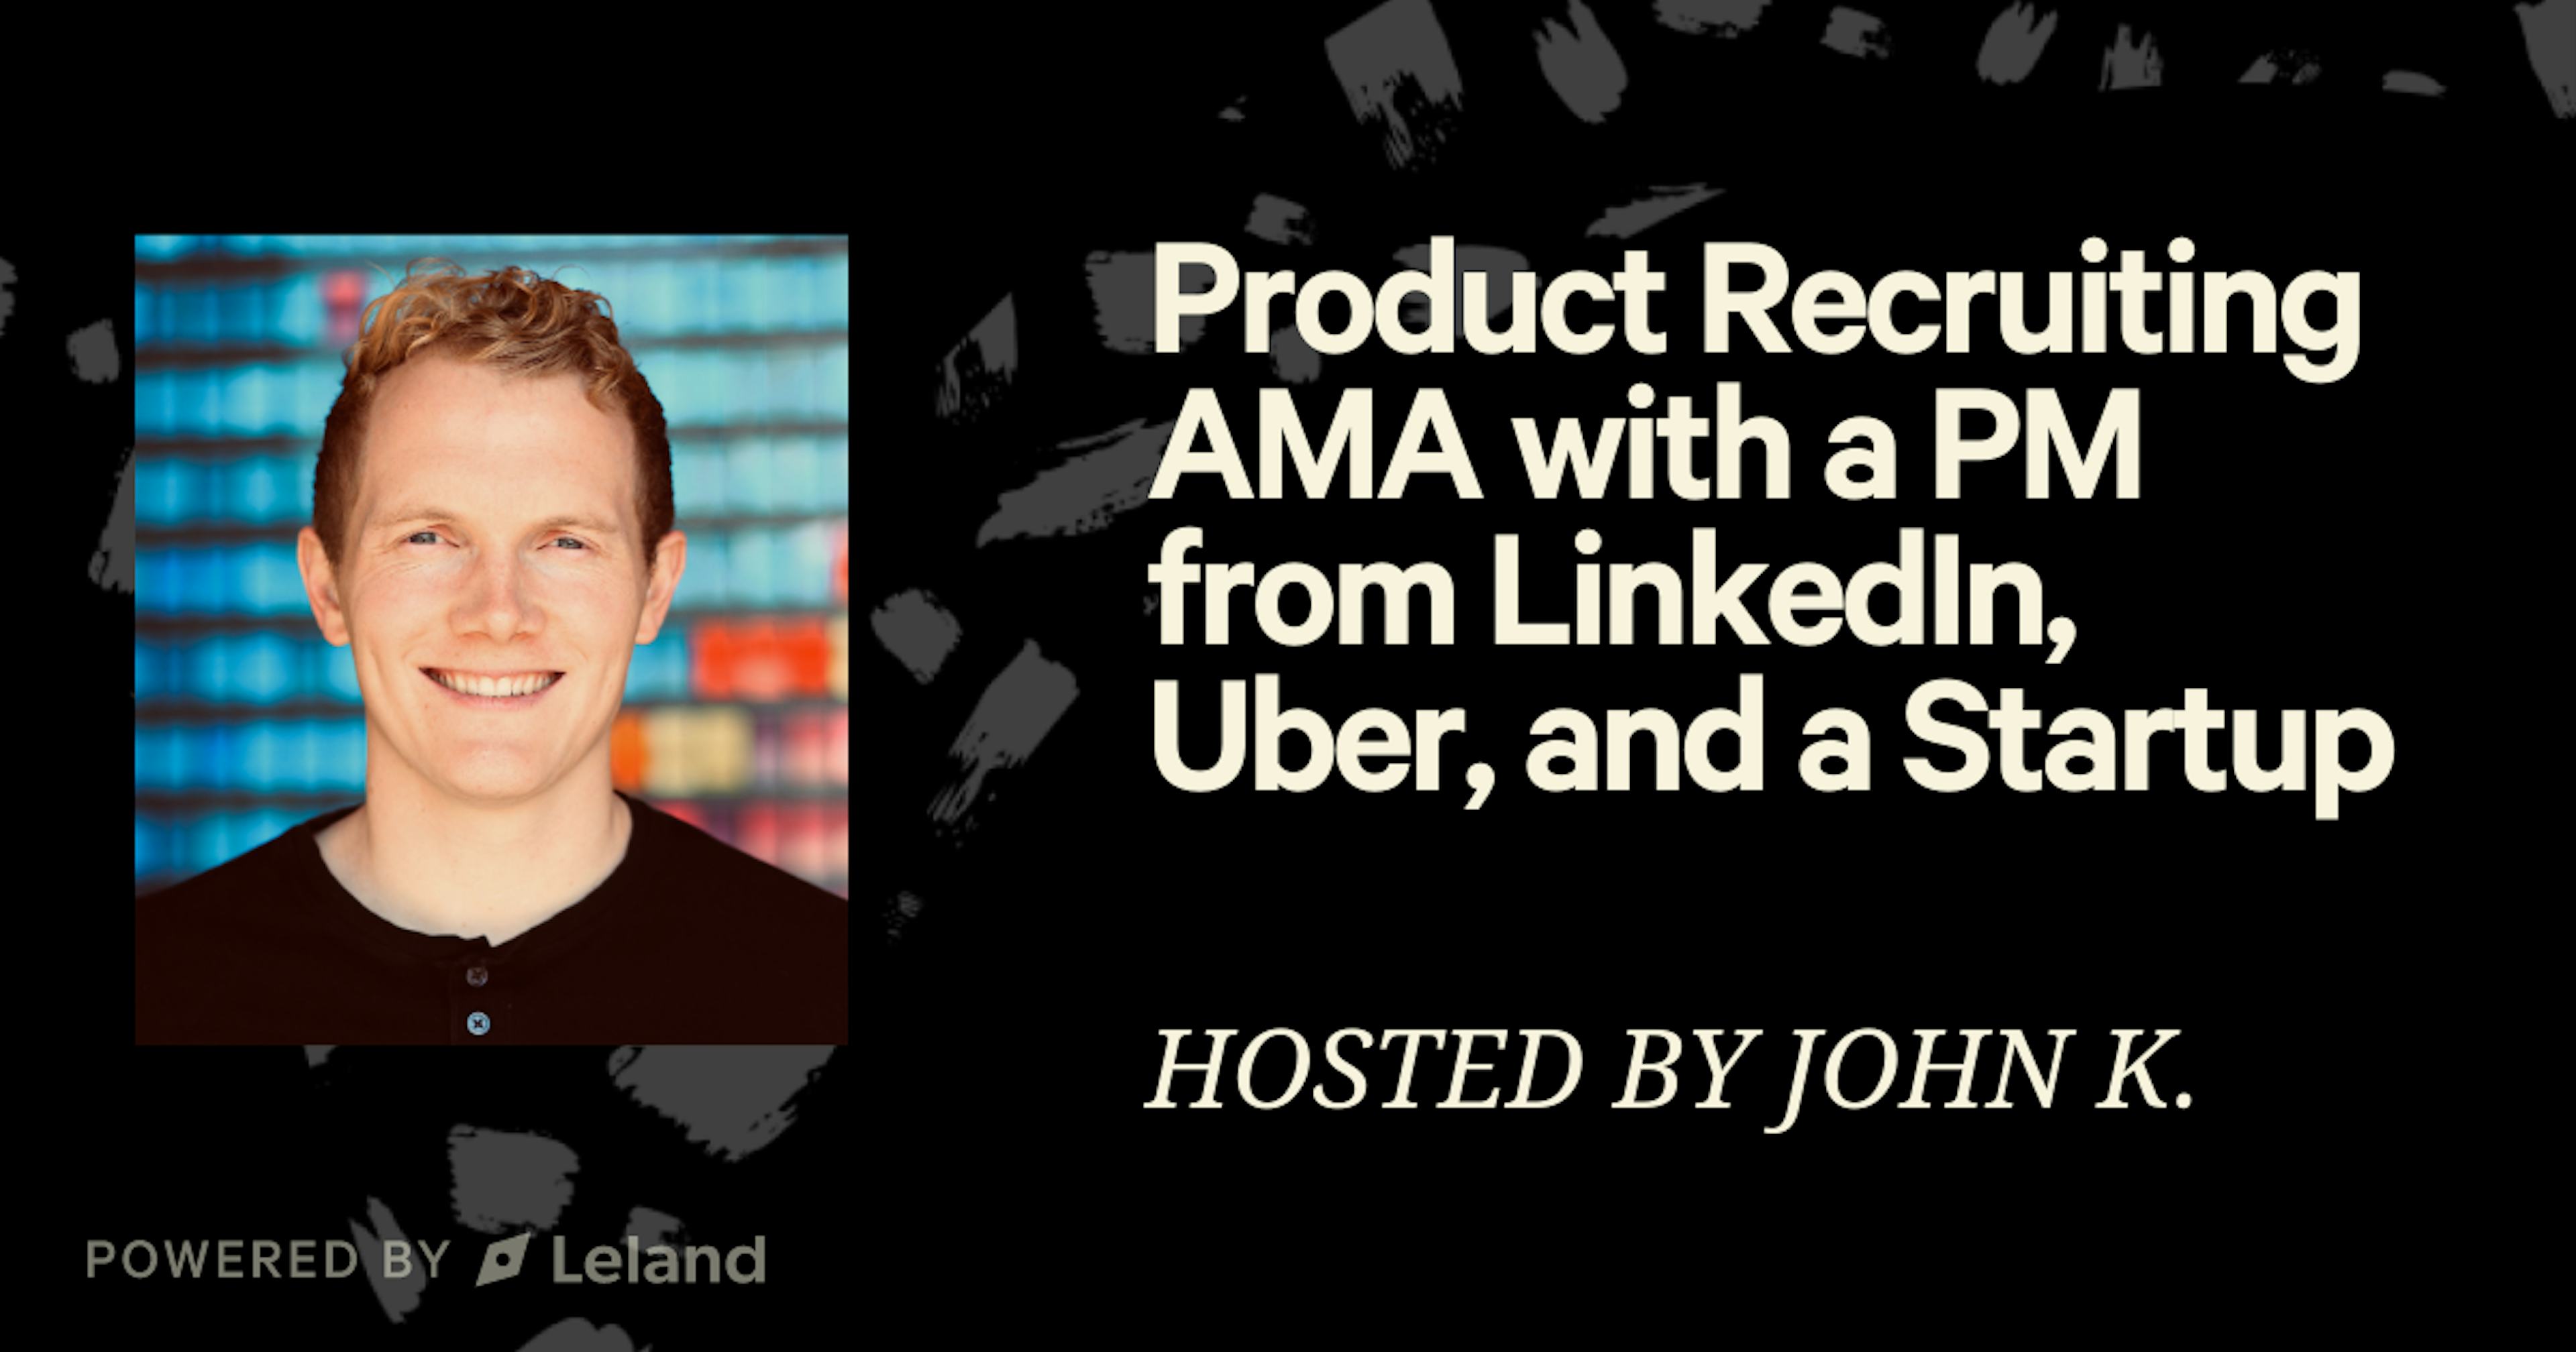 Product Recruiting AMA with a PM from LinkedIn, Uber, and a Startup